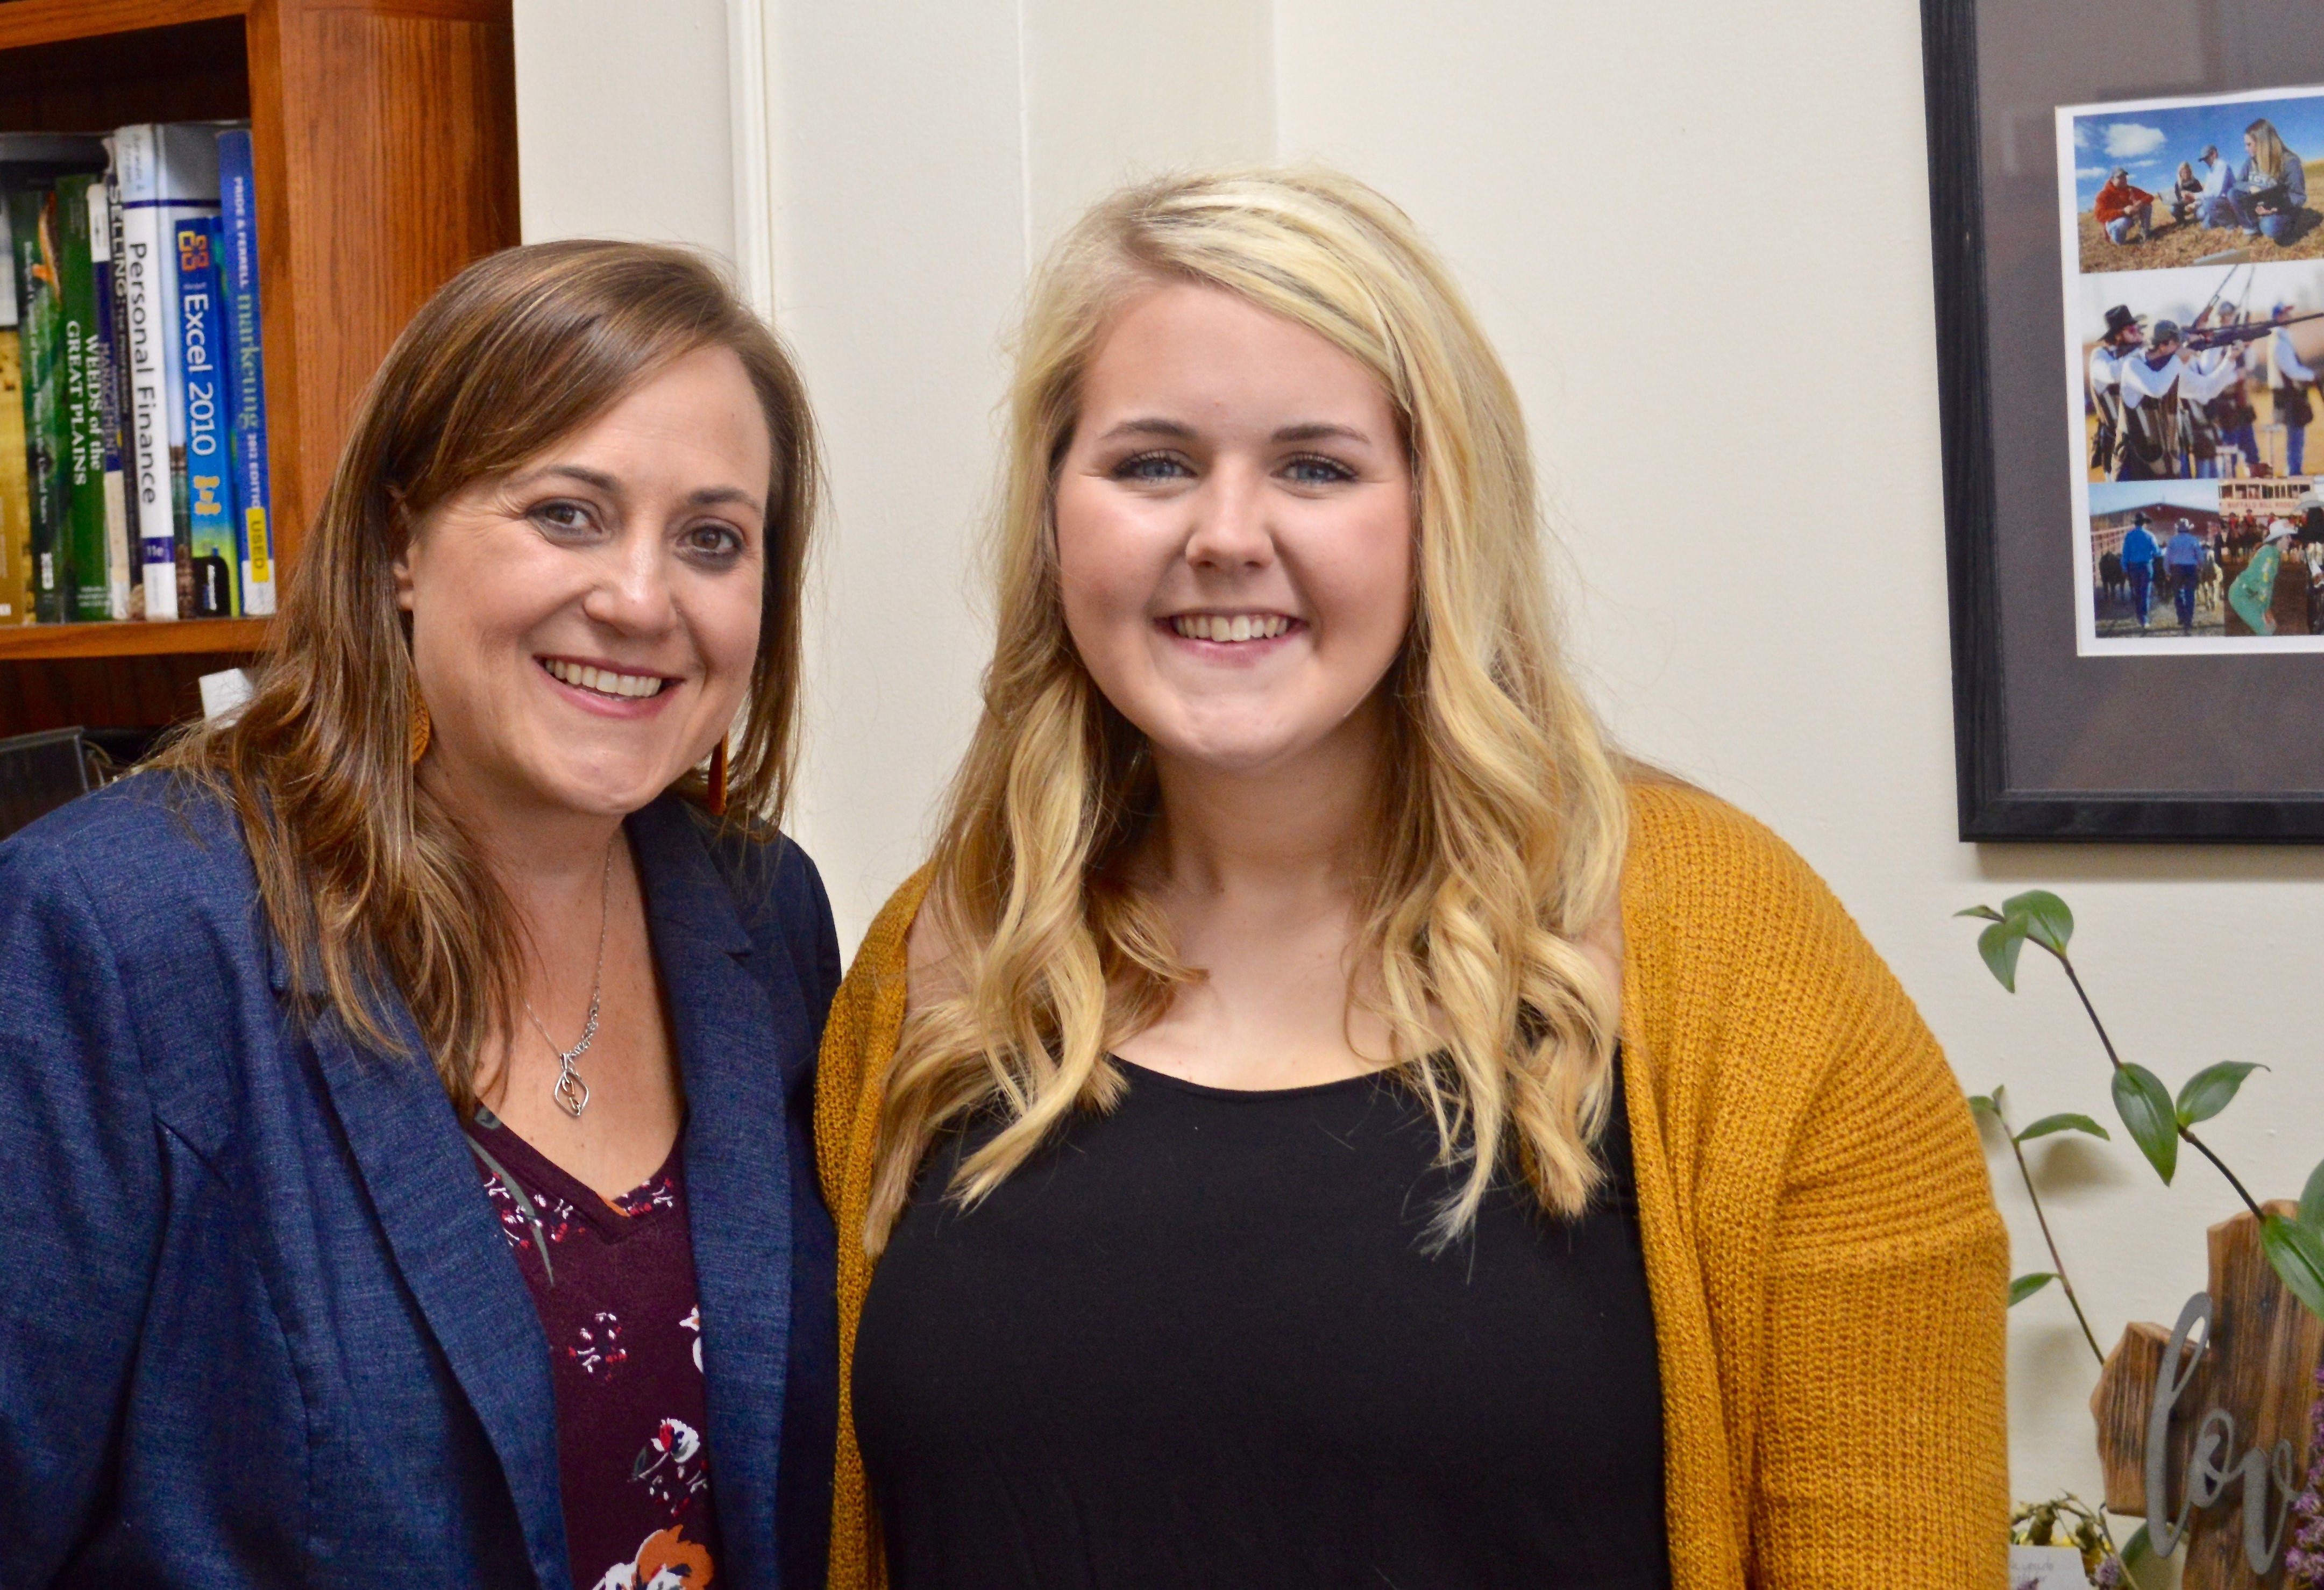 Morgan Wagner (at right) was nominated for Aggie of the Month at the Nebraska College of Technical Agriculture by NCTA Associate Dean Jennifer McConville. (Photo by Sophie Nutter, NCTA student)